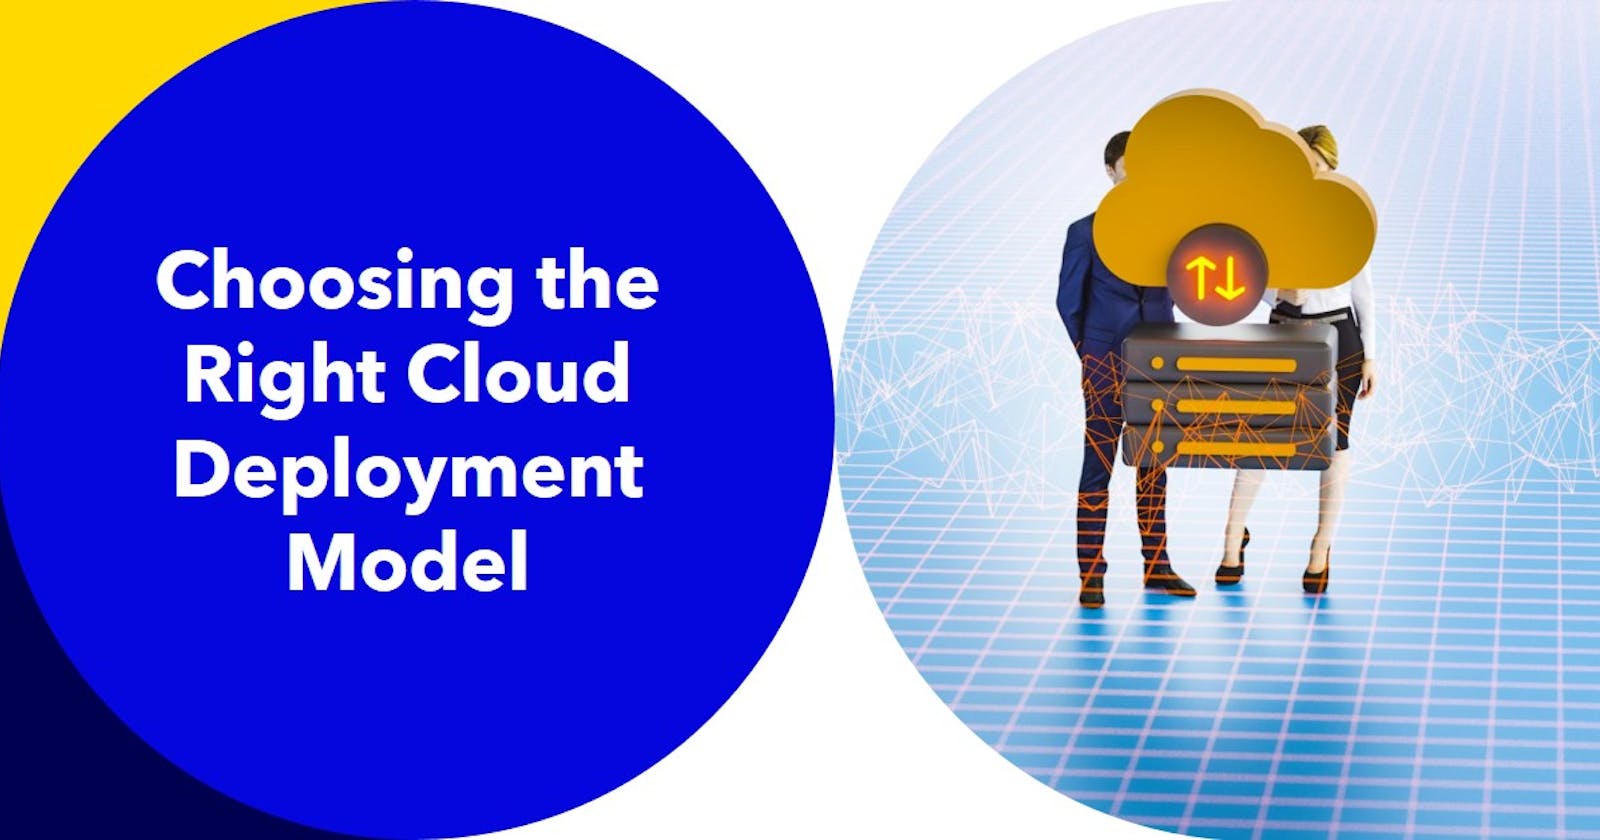 How to choose the right type of Cloud Deployment Model?